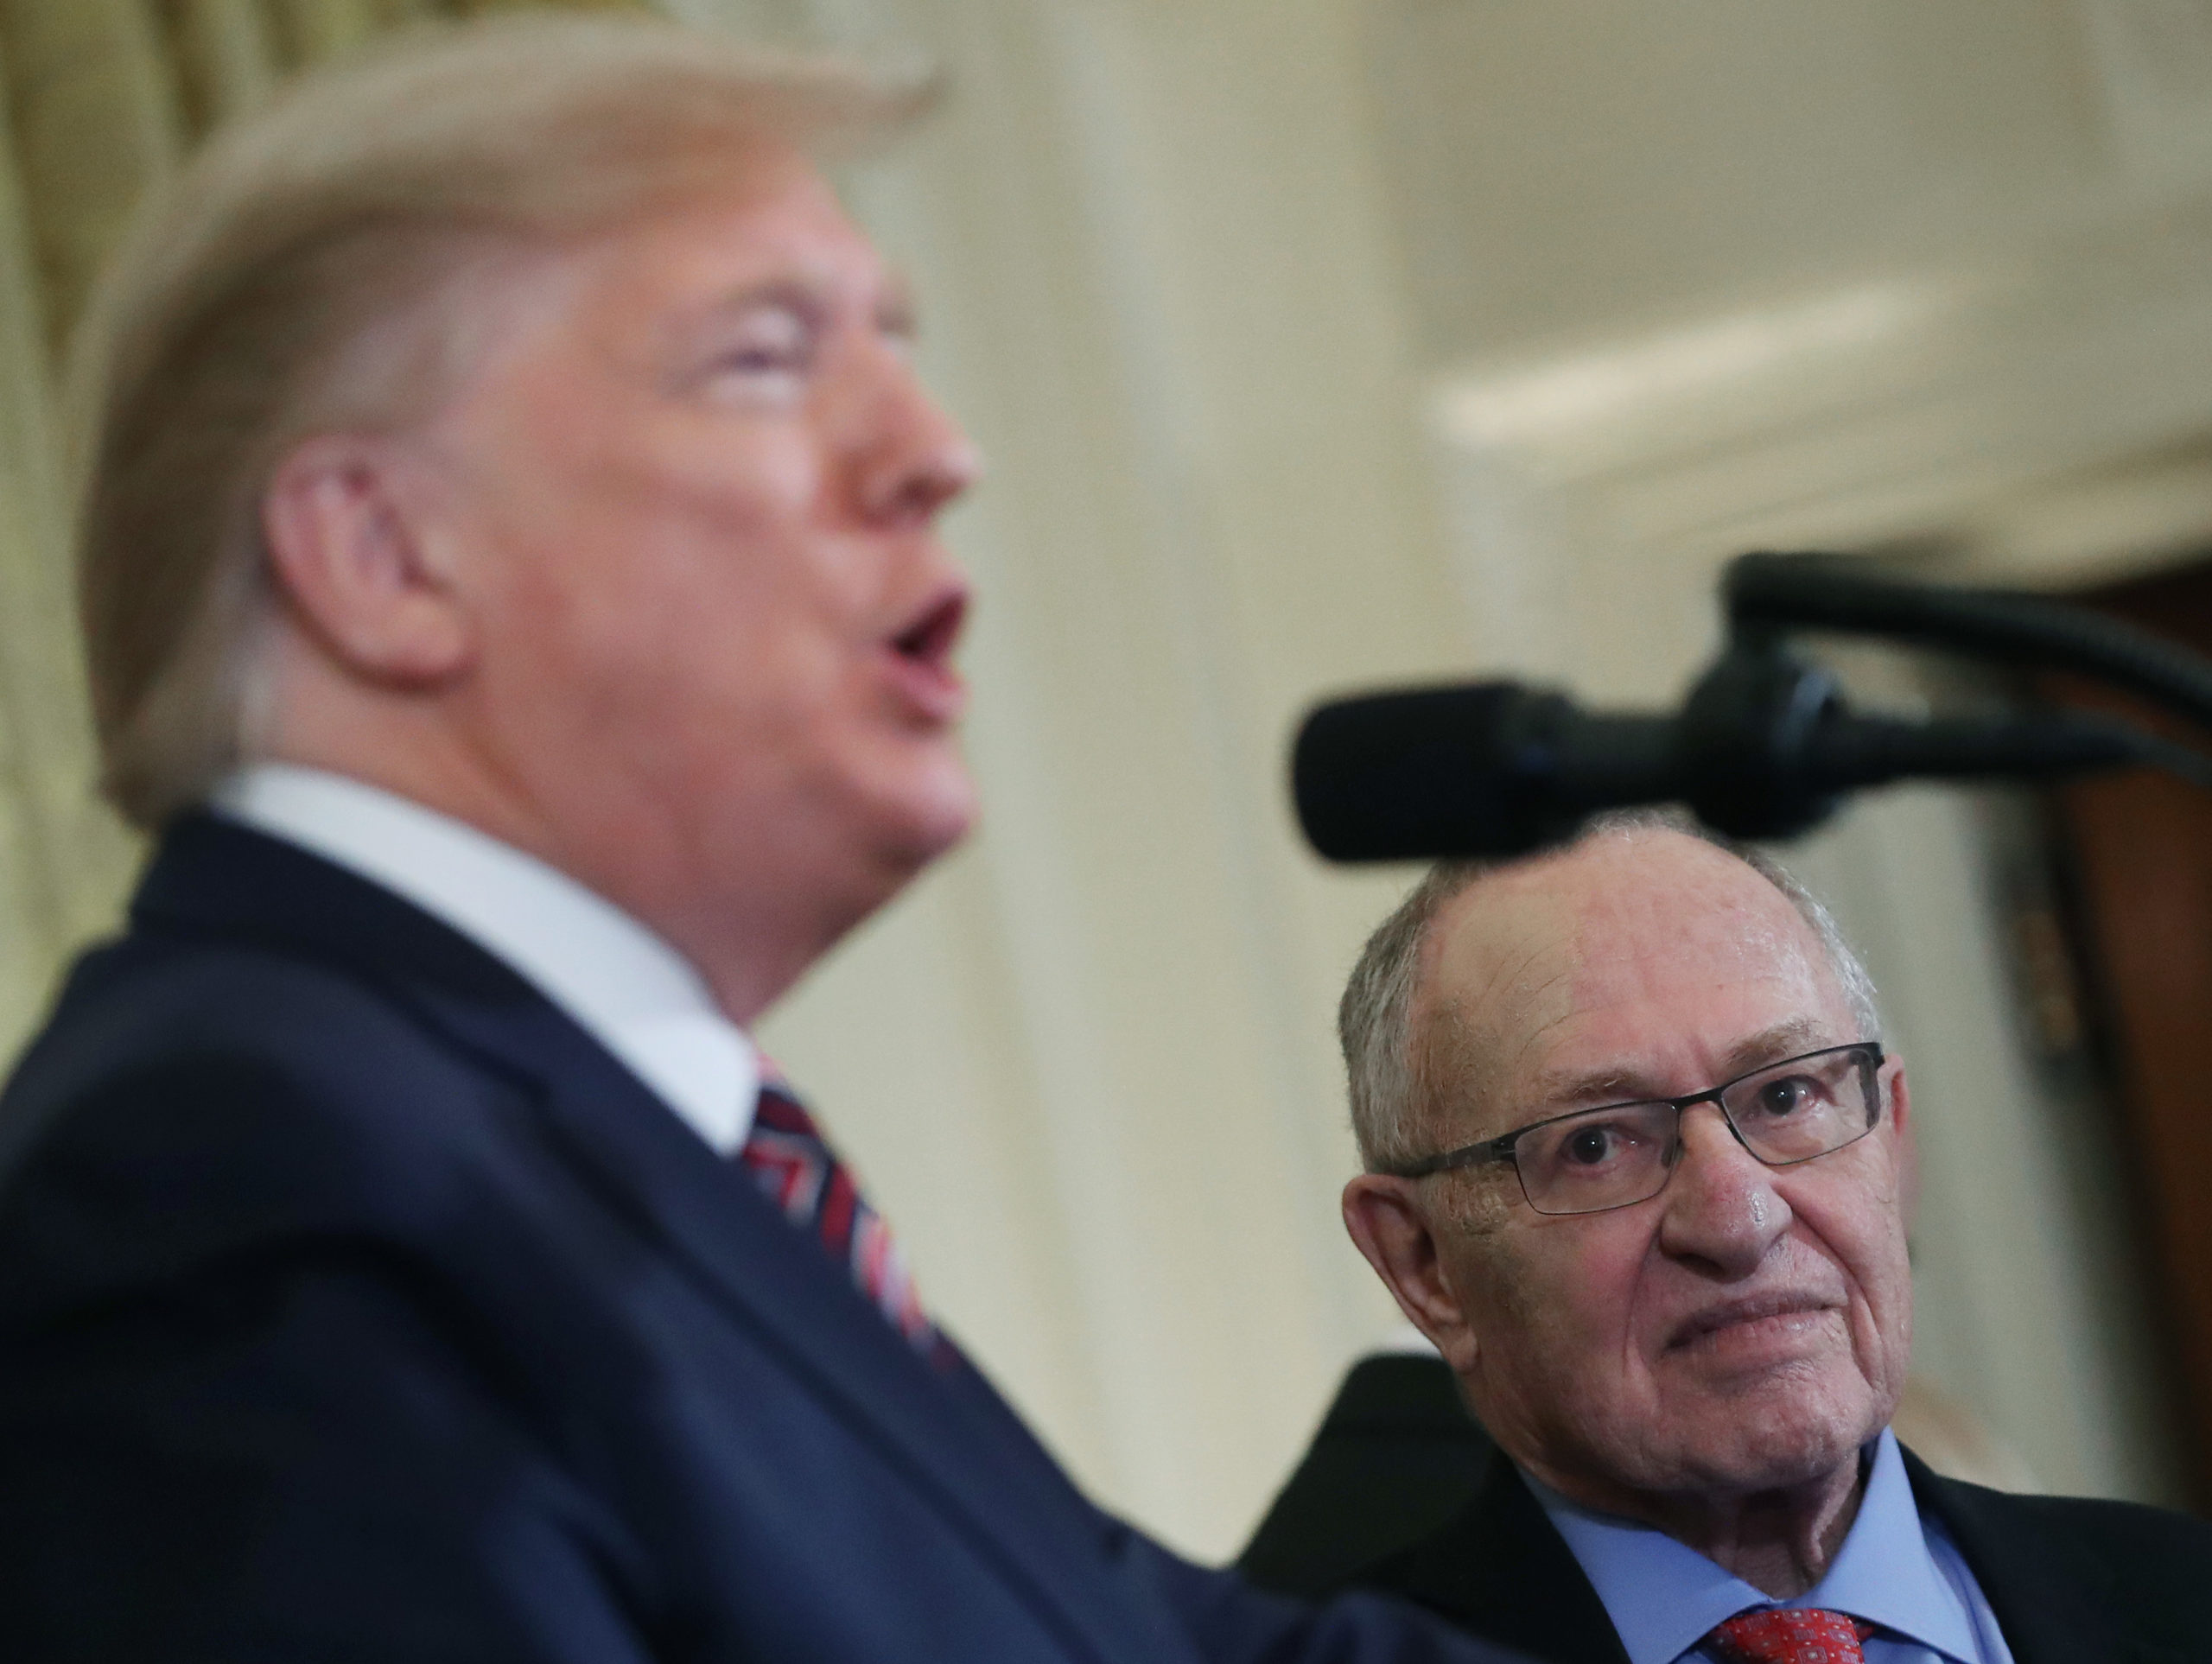 Trump Can Serve as President ‘From Prison,’ Alan Dershowitz Suggests